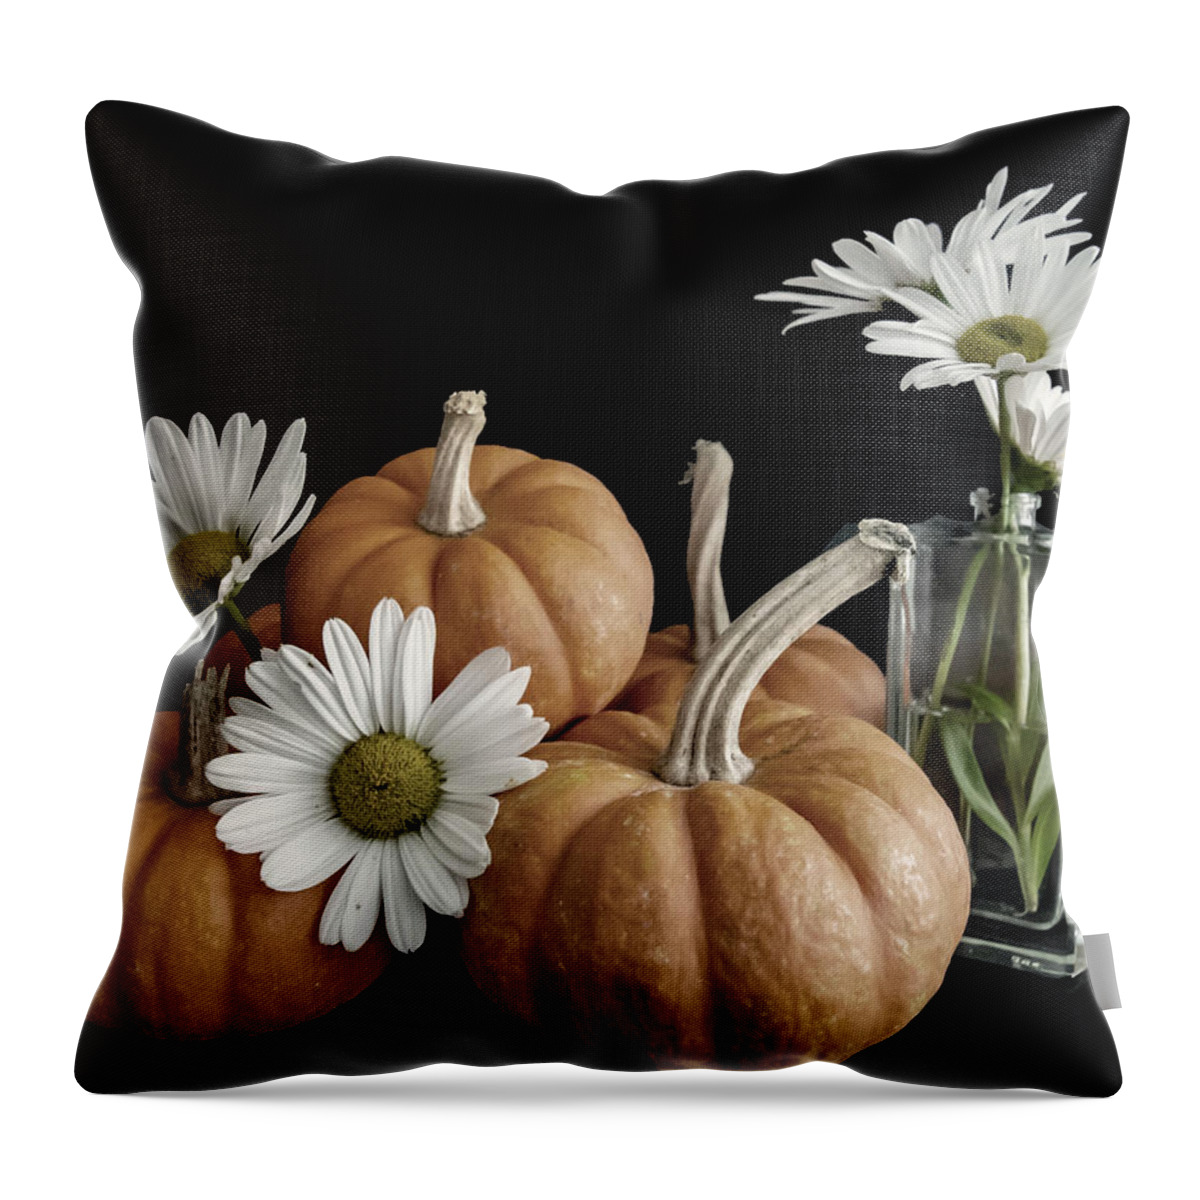 Flowers Throw Pillow featuring the photograph Happy Autumn by Cathy Kovarik